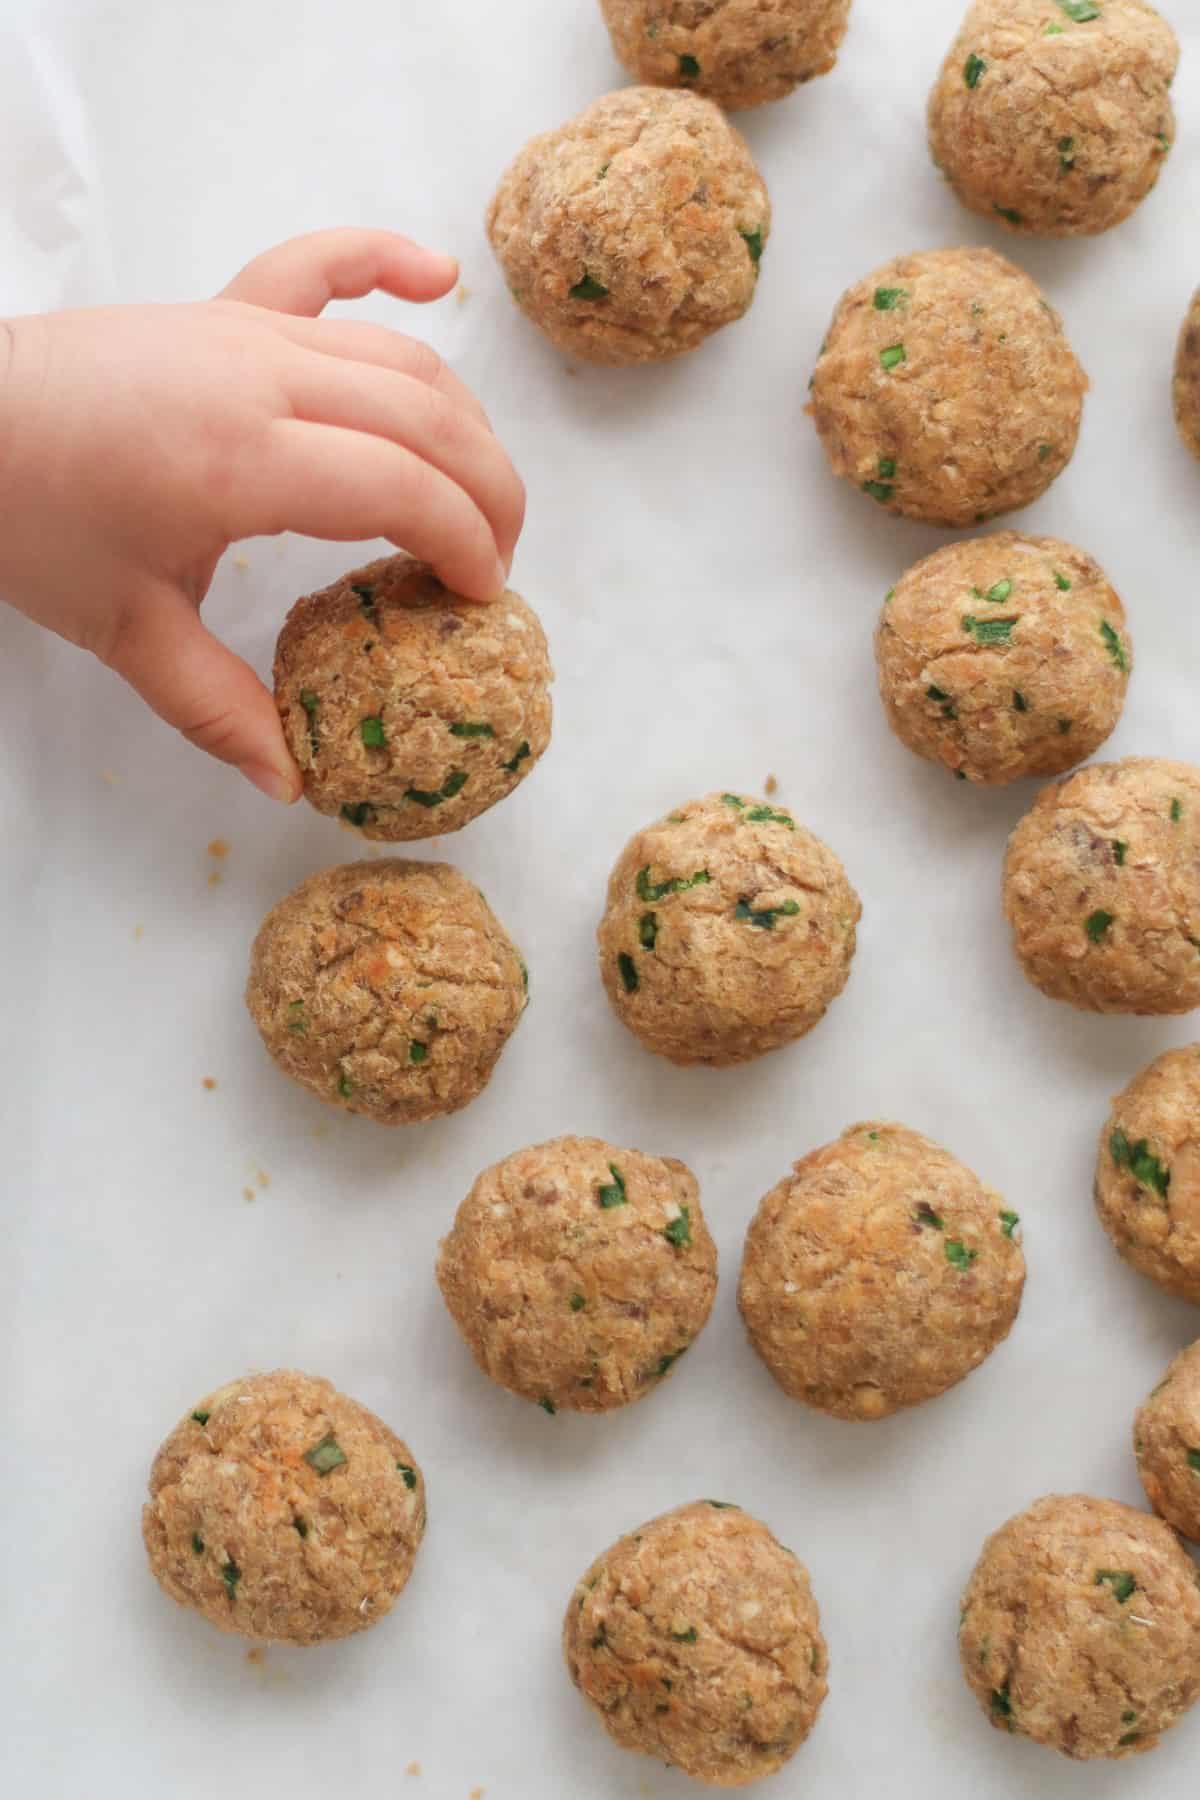 Baked salmon balls on parchment paper with toddler's hand grabbing one.